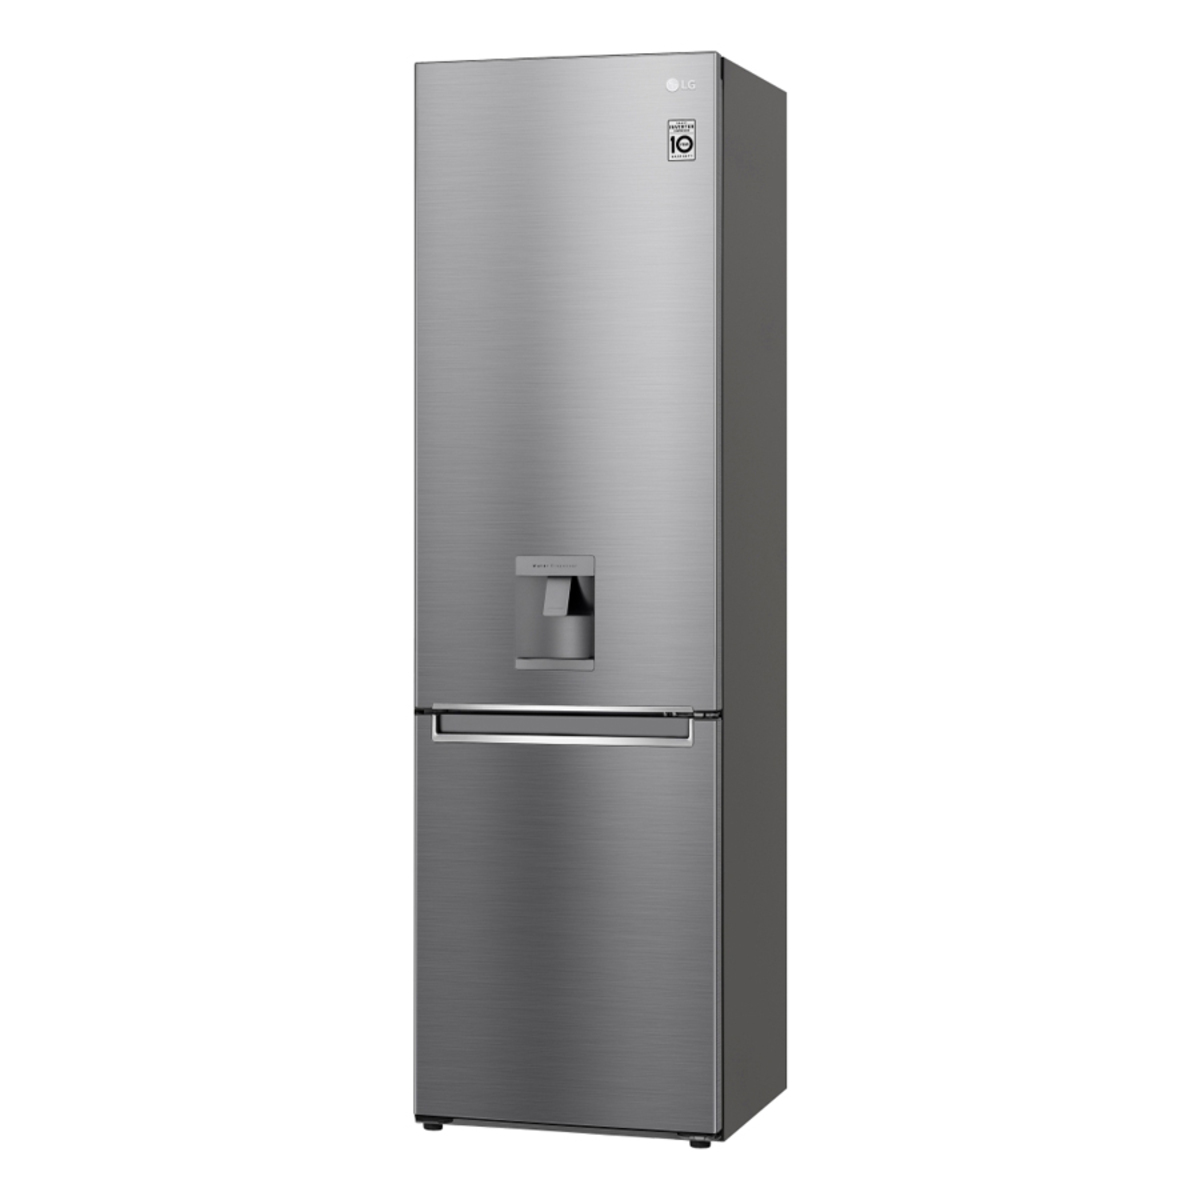 LG GBF62PZGGN D Rated 384L 60cm Tall Fridge Freezer, Stainless steel